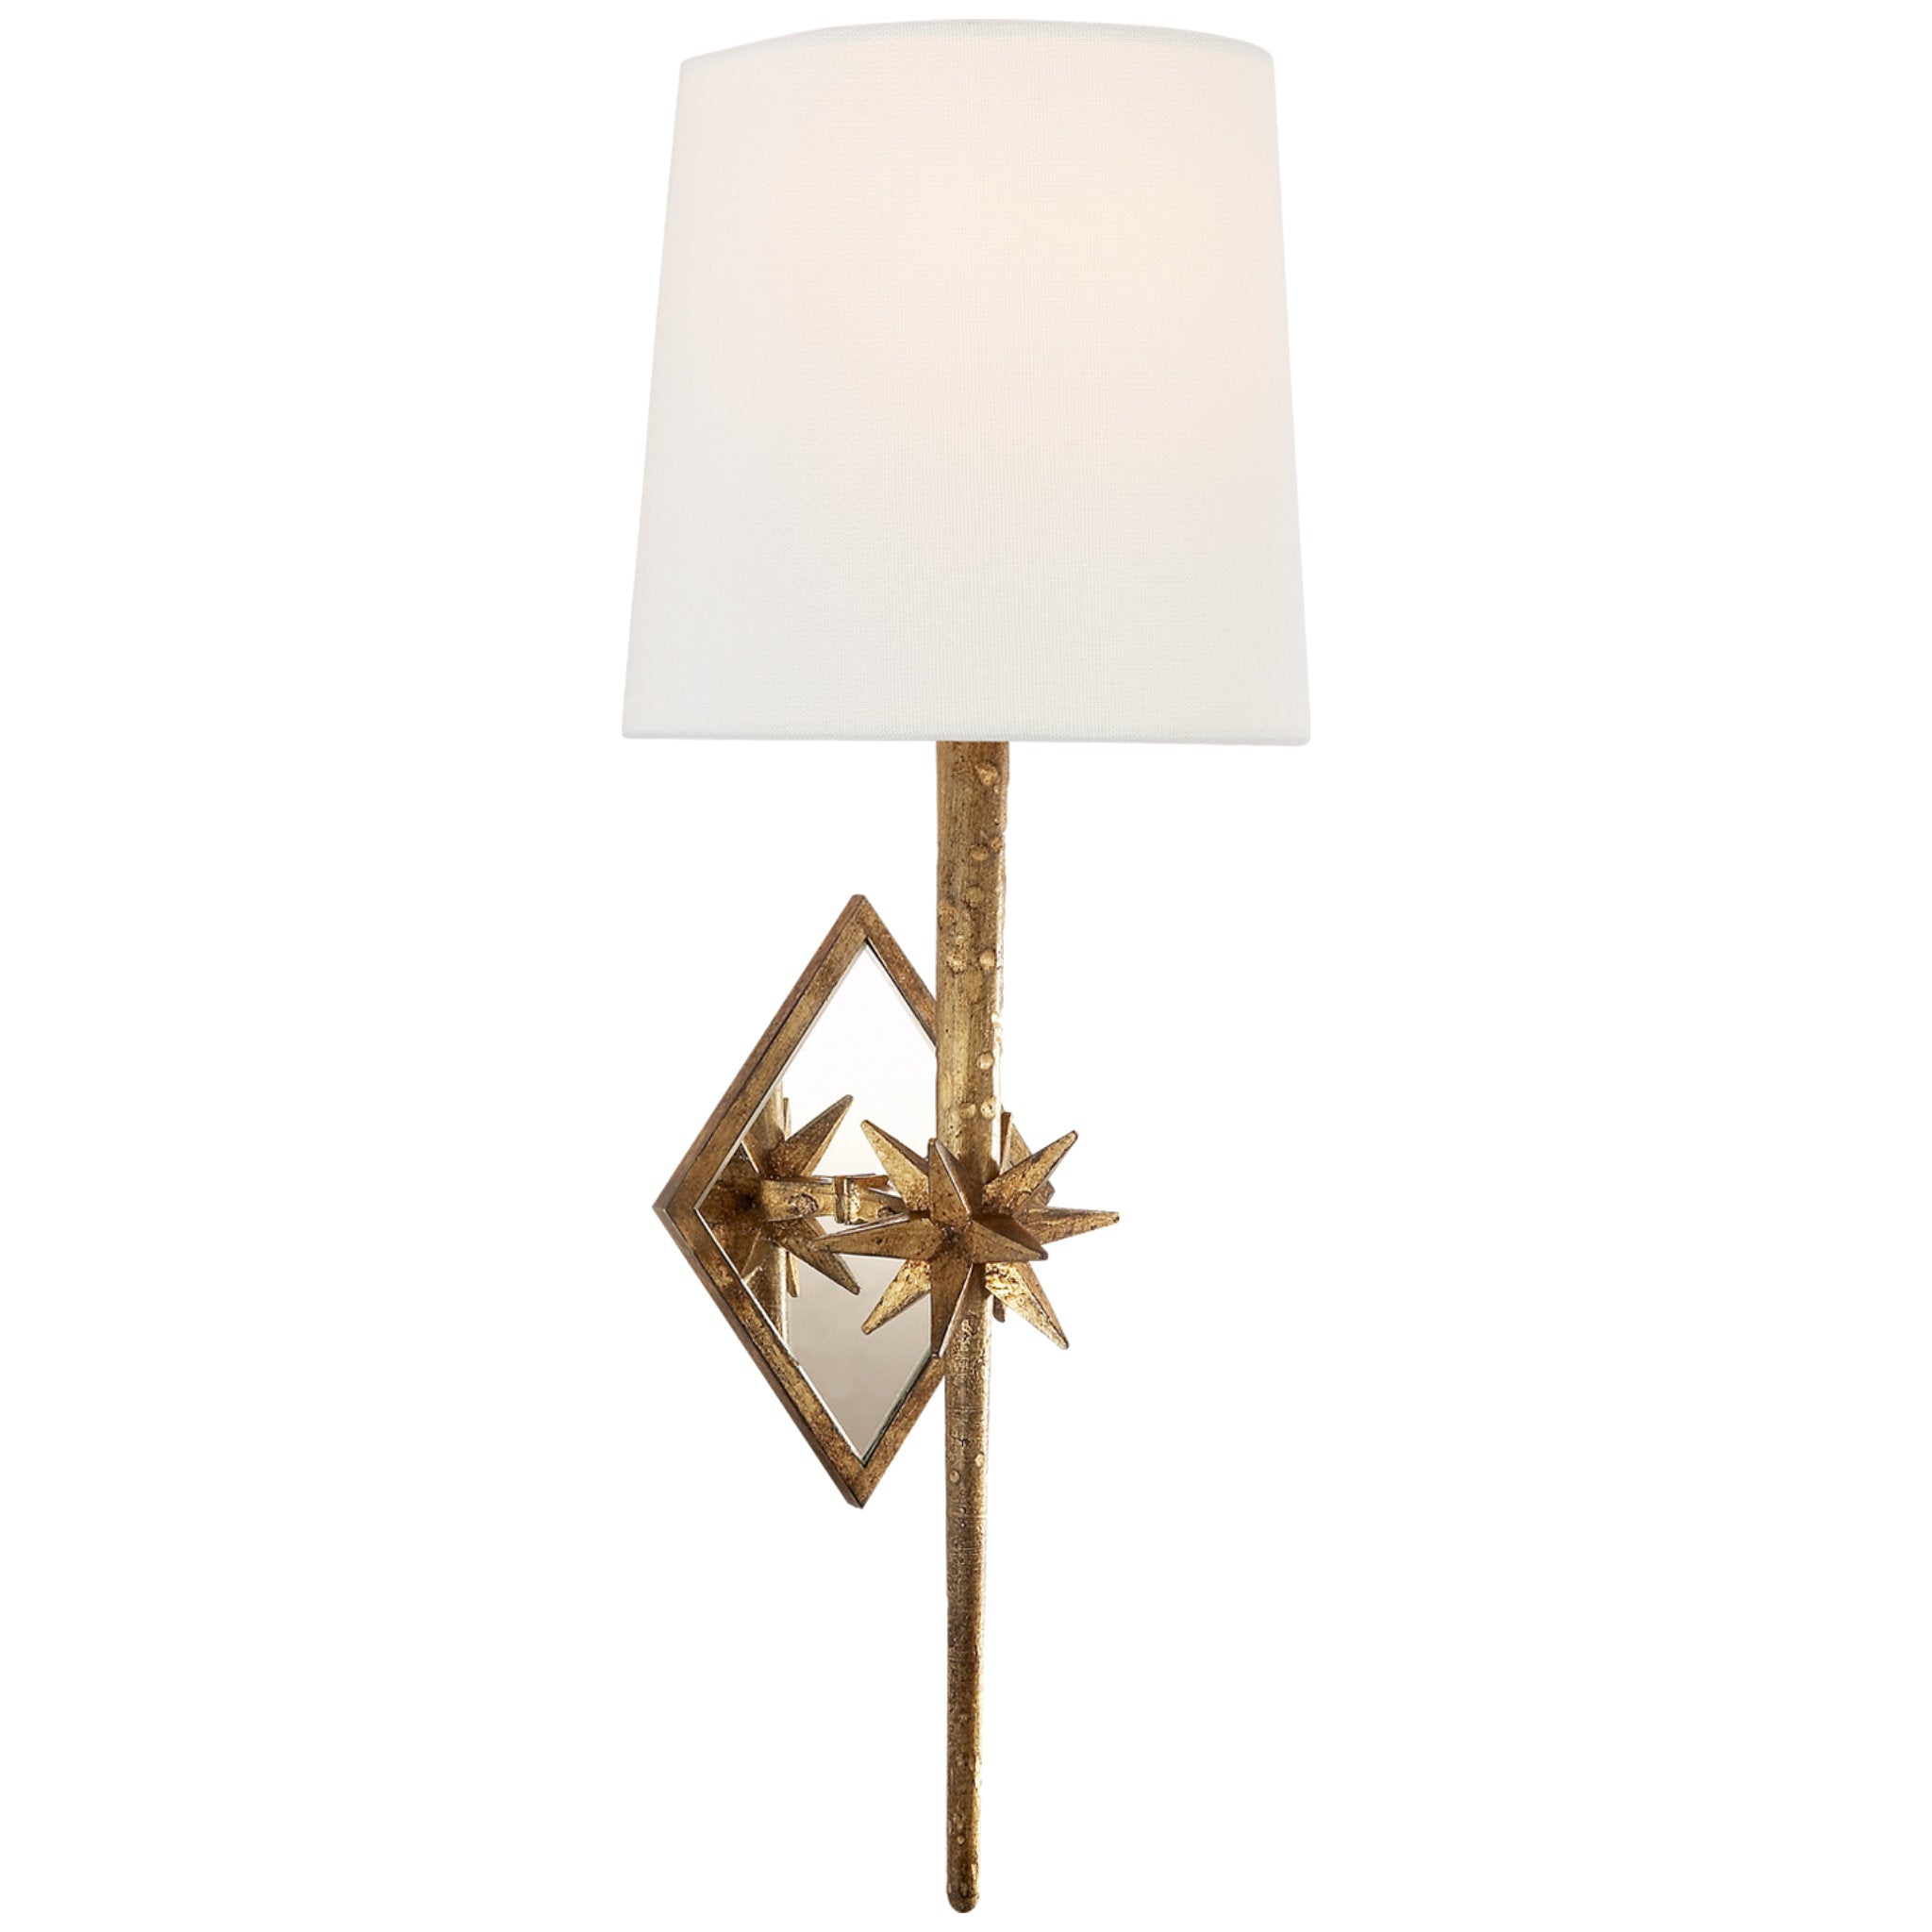 Ian K. Fowler Etoile Sconce in Gilded Iron with Linen Shade